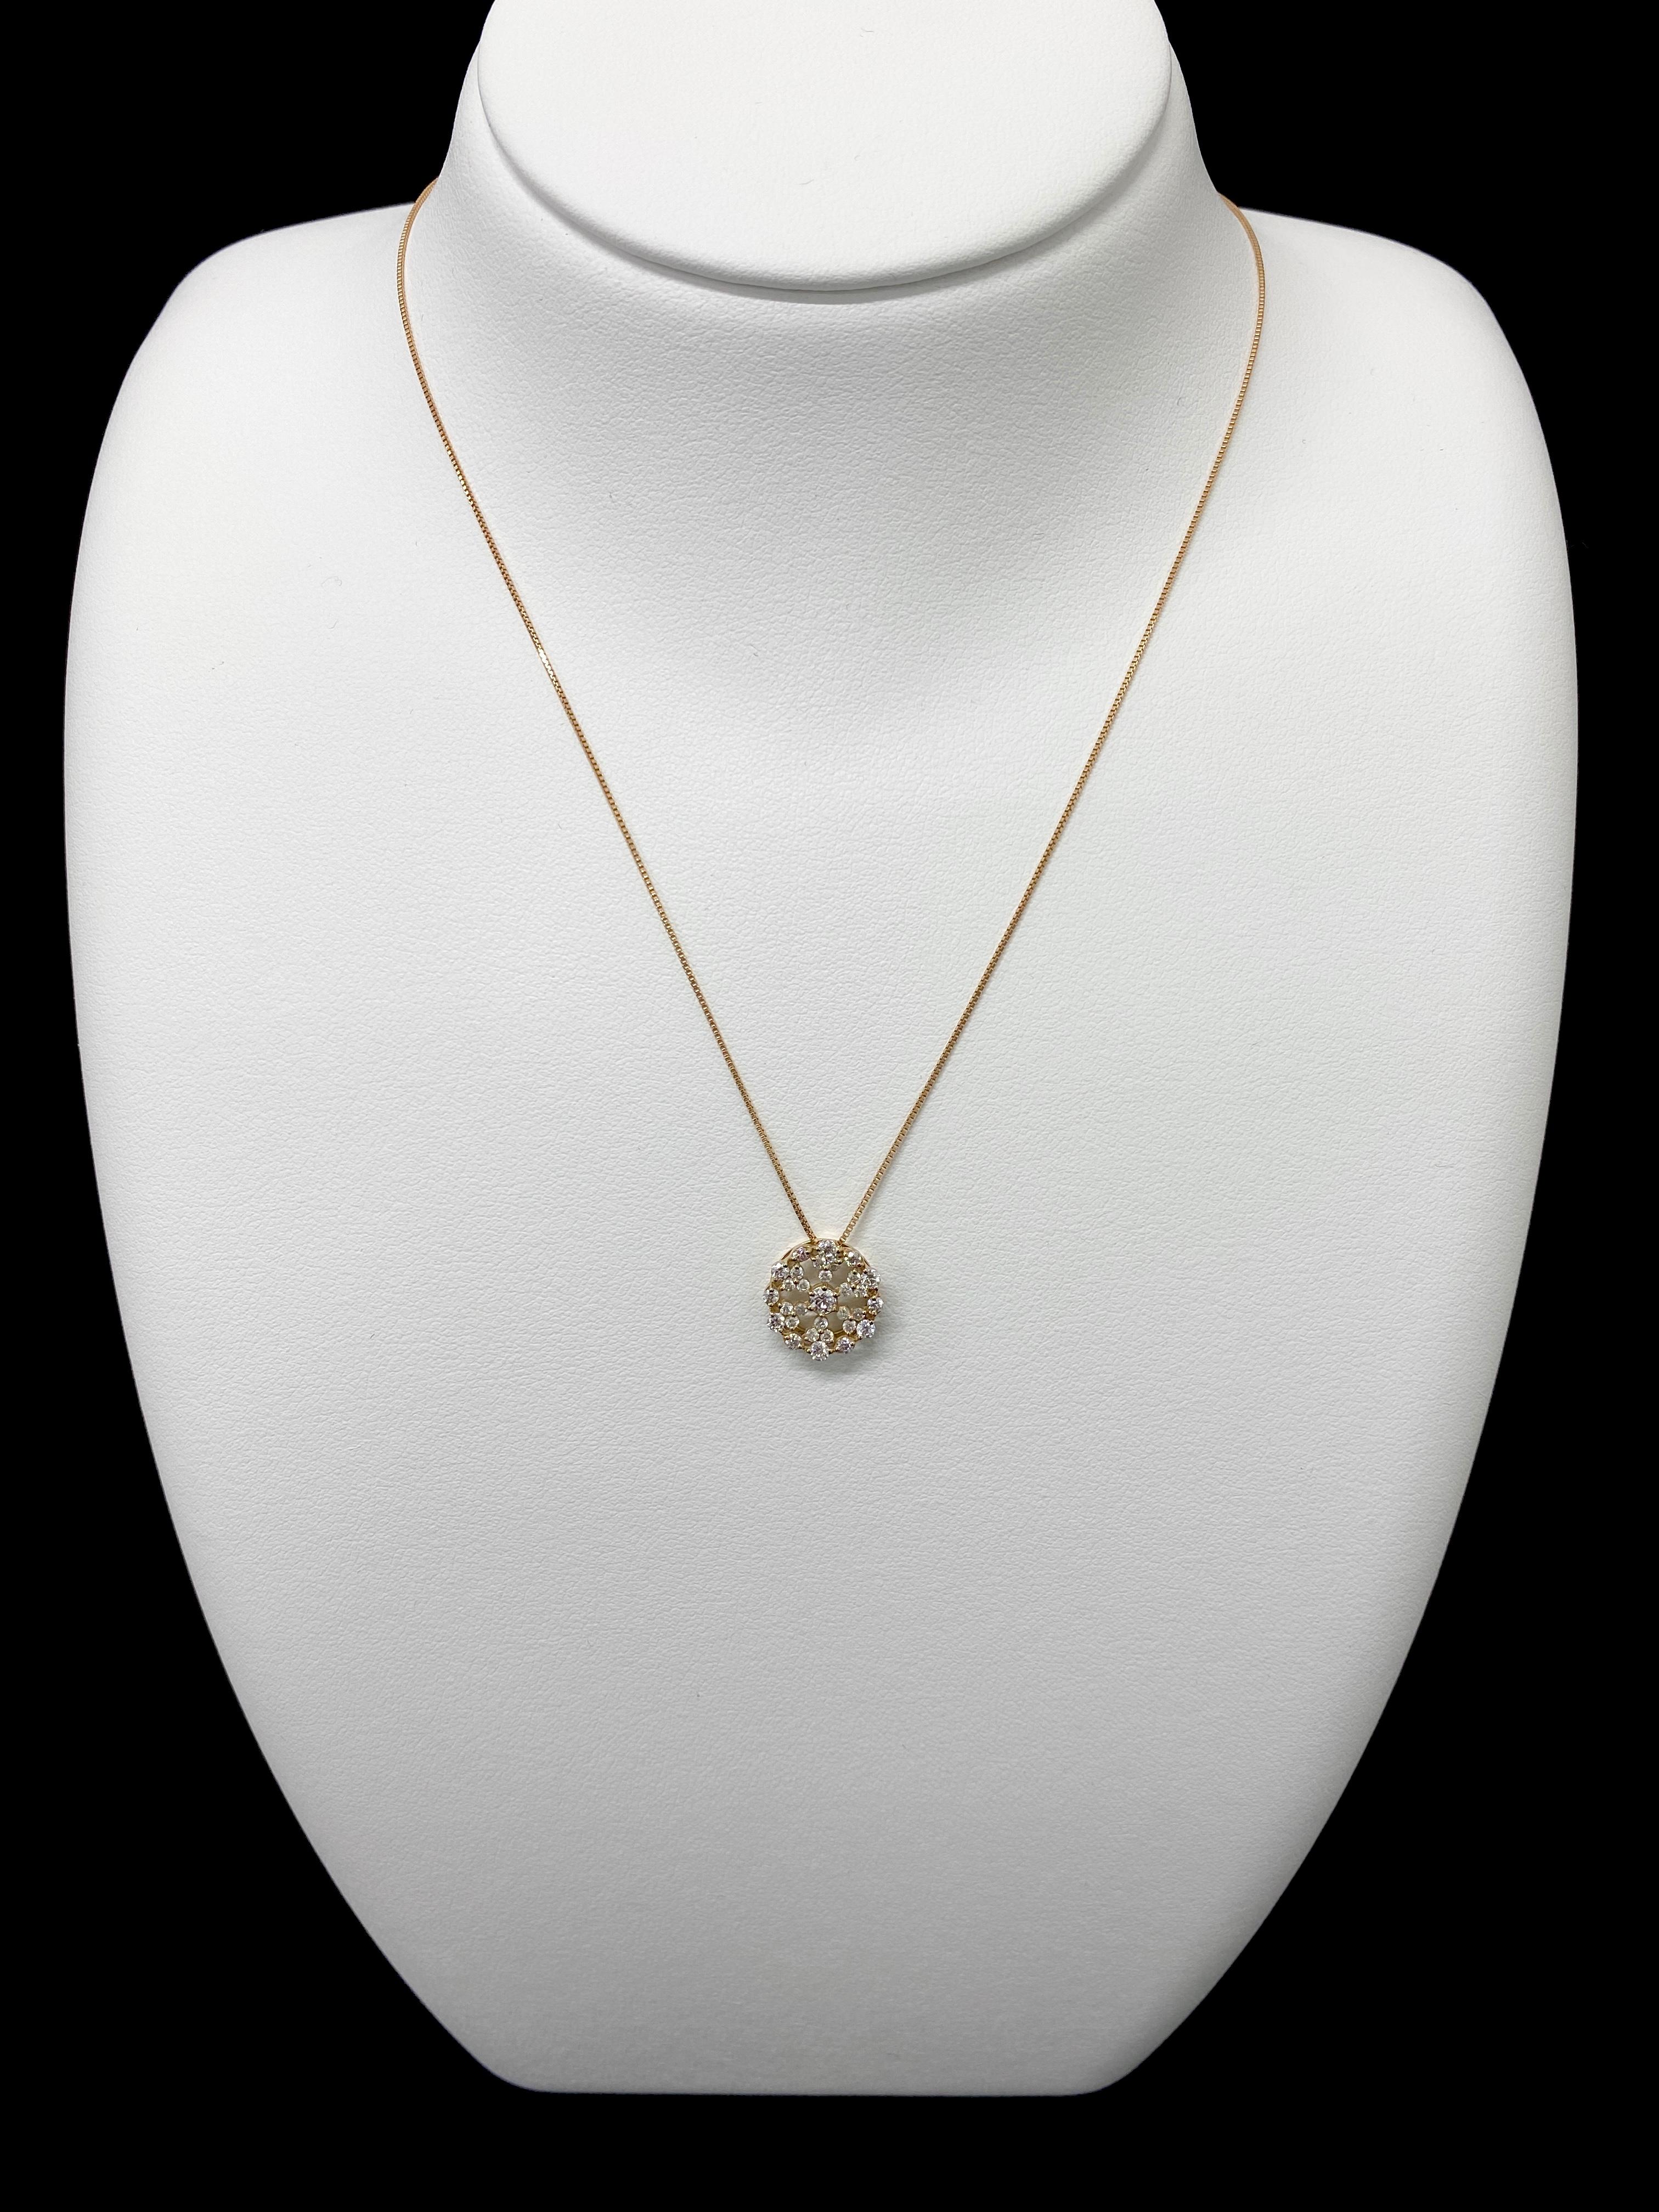 A stunning Pendant Necklace featuring 0.87 Carats Diamond set in 18 Karat Pink Gold. Diamonds have been adorned and cherished throughout human history and date back to thousands of years. They are rated as 10 on the Mohs Hardness Scale hence are